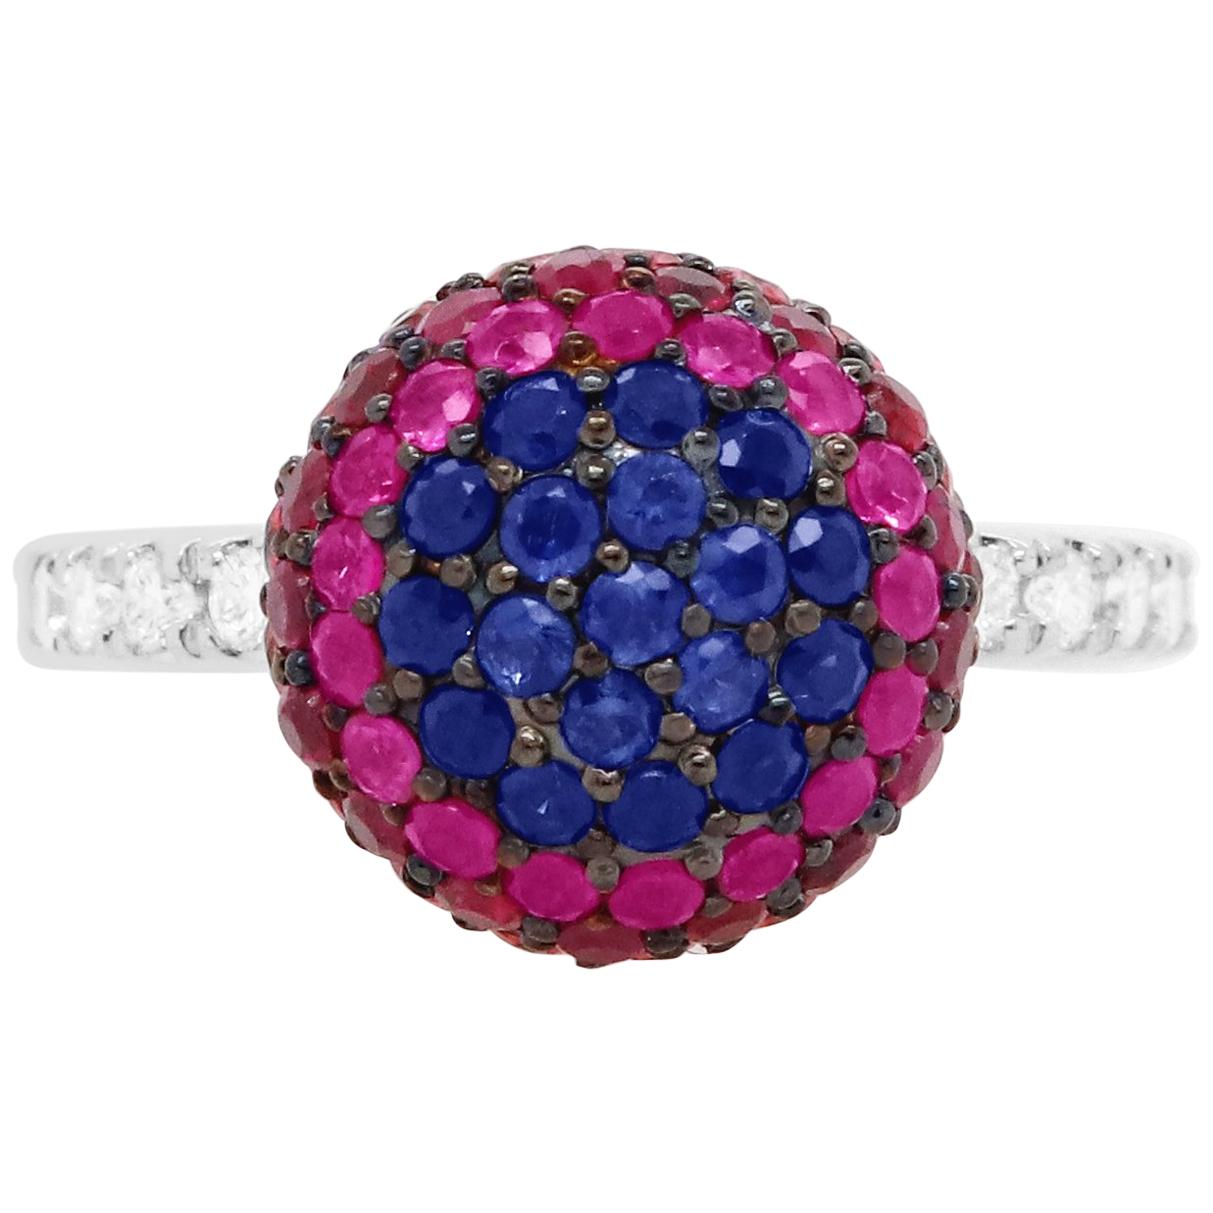 Material: 14k White Gold 
Center Stone Details:  Round Multicolor Sapphires - at 2.94 Carats - Navy, Pink, Red, Orange, Yellow
Diamond Details:  Round White Diamonds at 0.27 Carats
Ring Size: Size 7. Alberto offers complimentary sizing on all